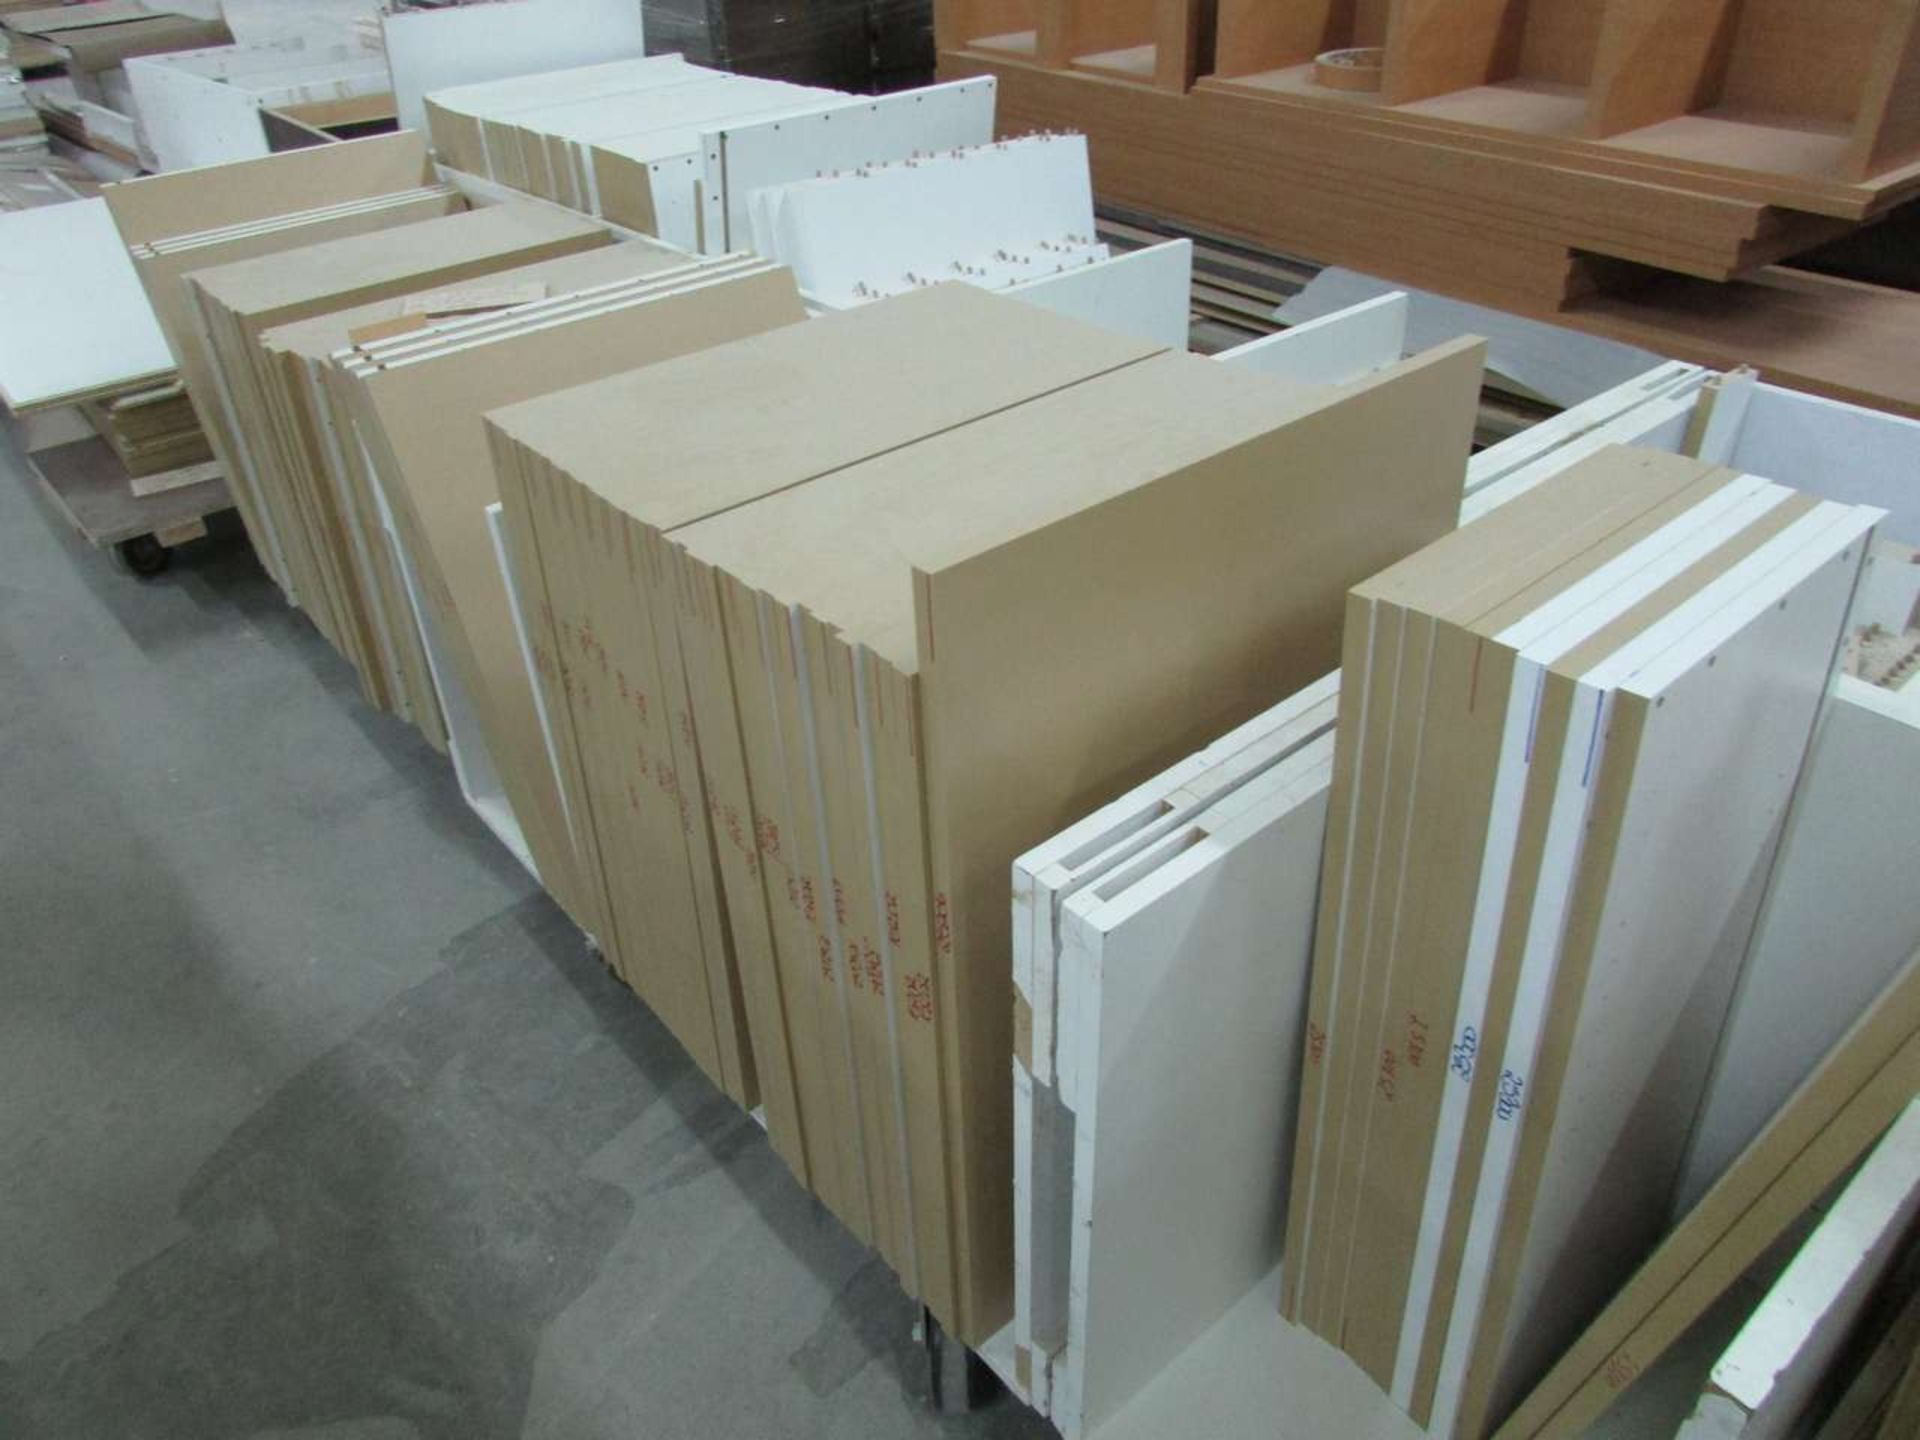 Row of Assorted Wood Panels and Supply Carts - Image 2 of 4